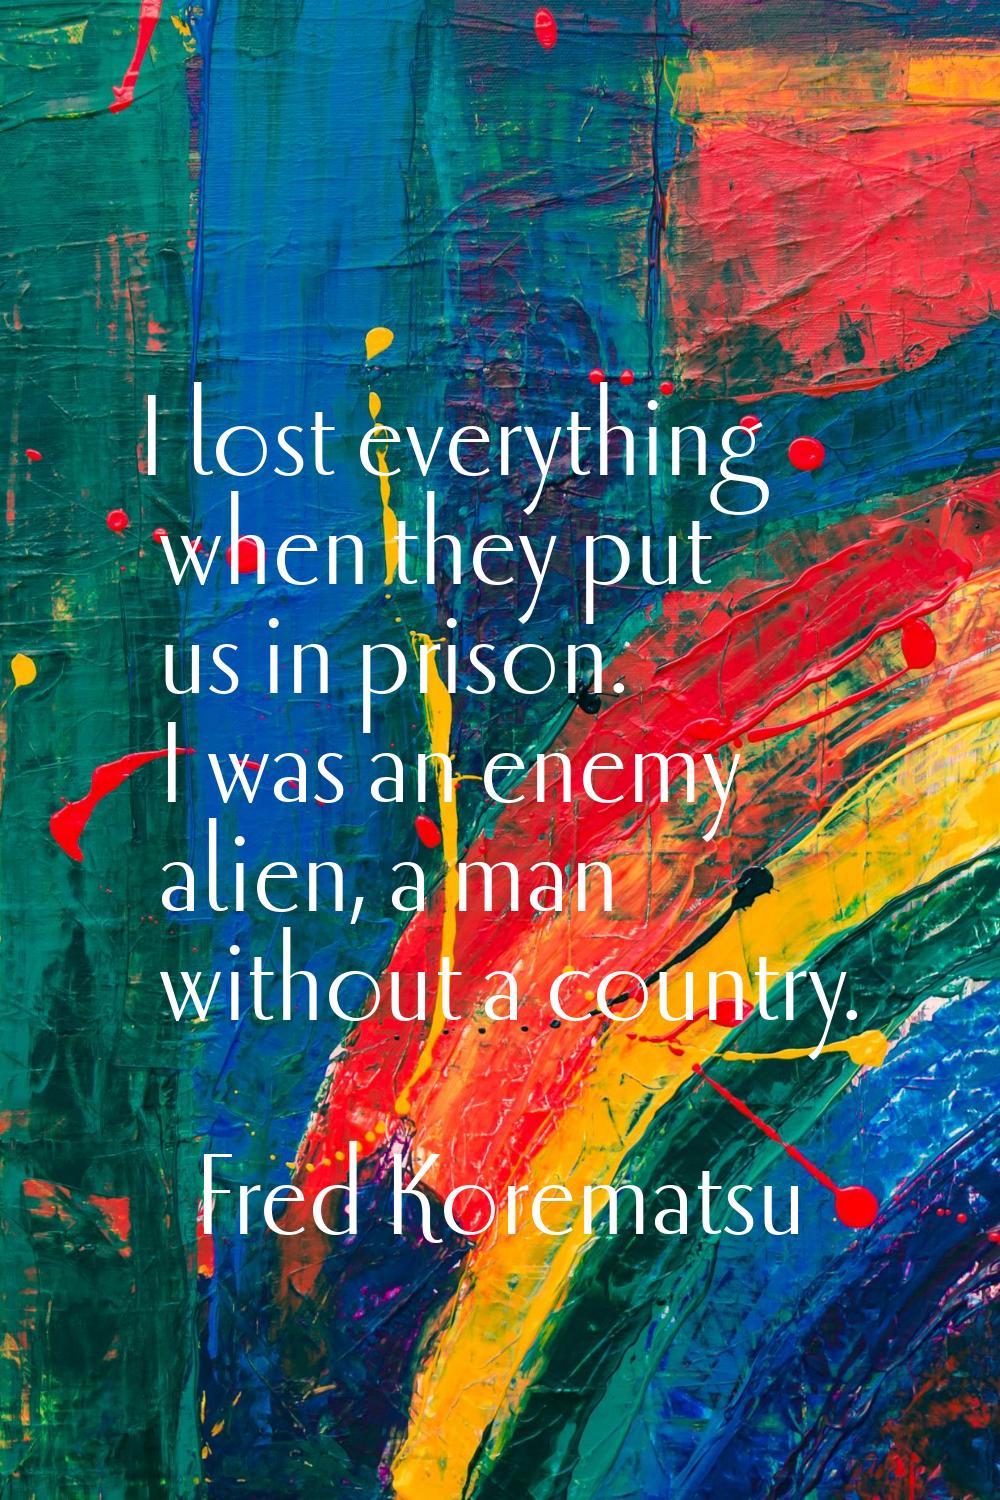 I lost everything when they put us in prison. I was an enemy alien, a man without a country.